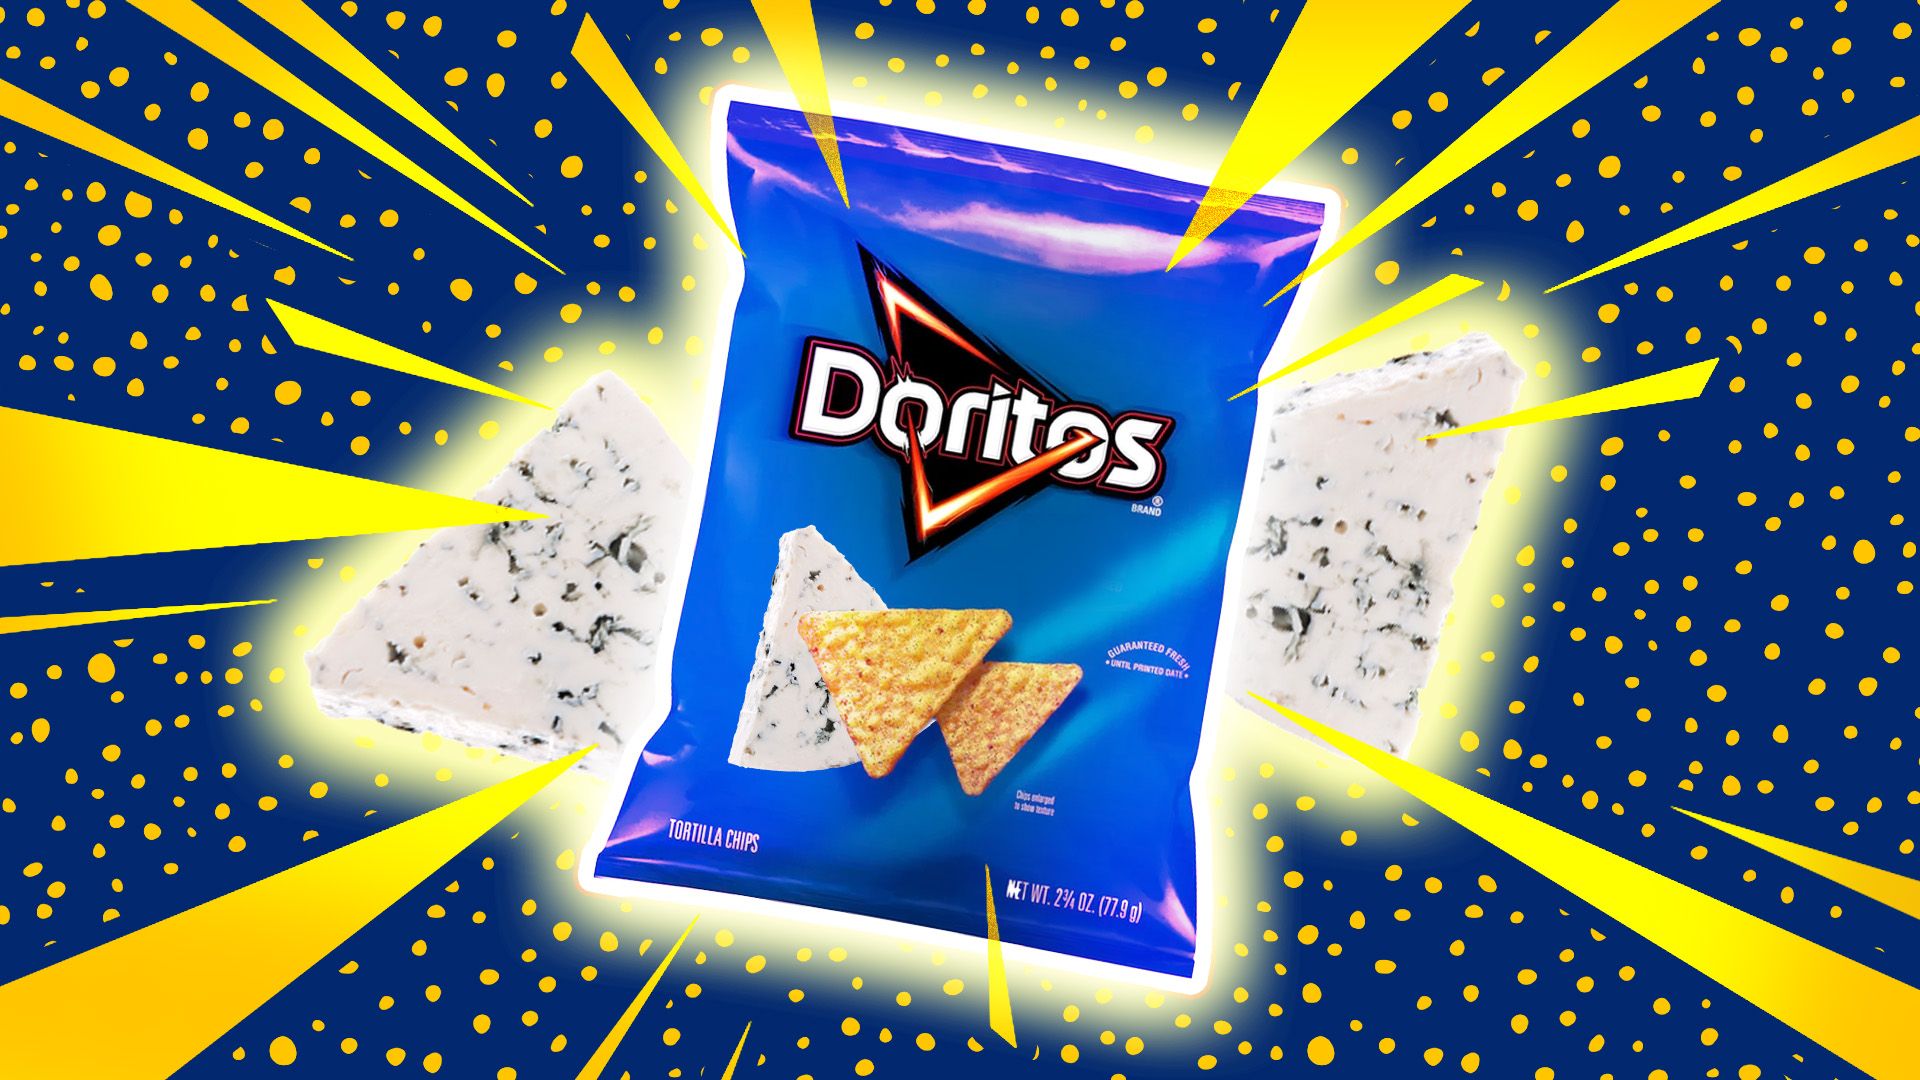 A bag of blue cheese Doritos on a blue background with yellow and white lines - Doritos